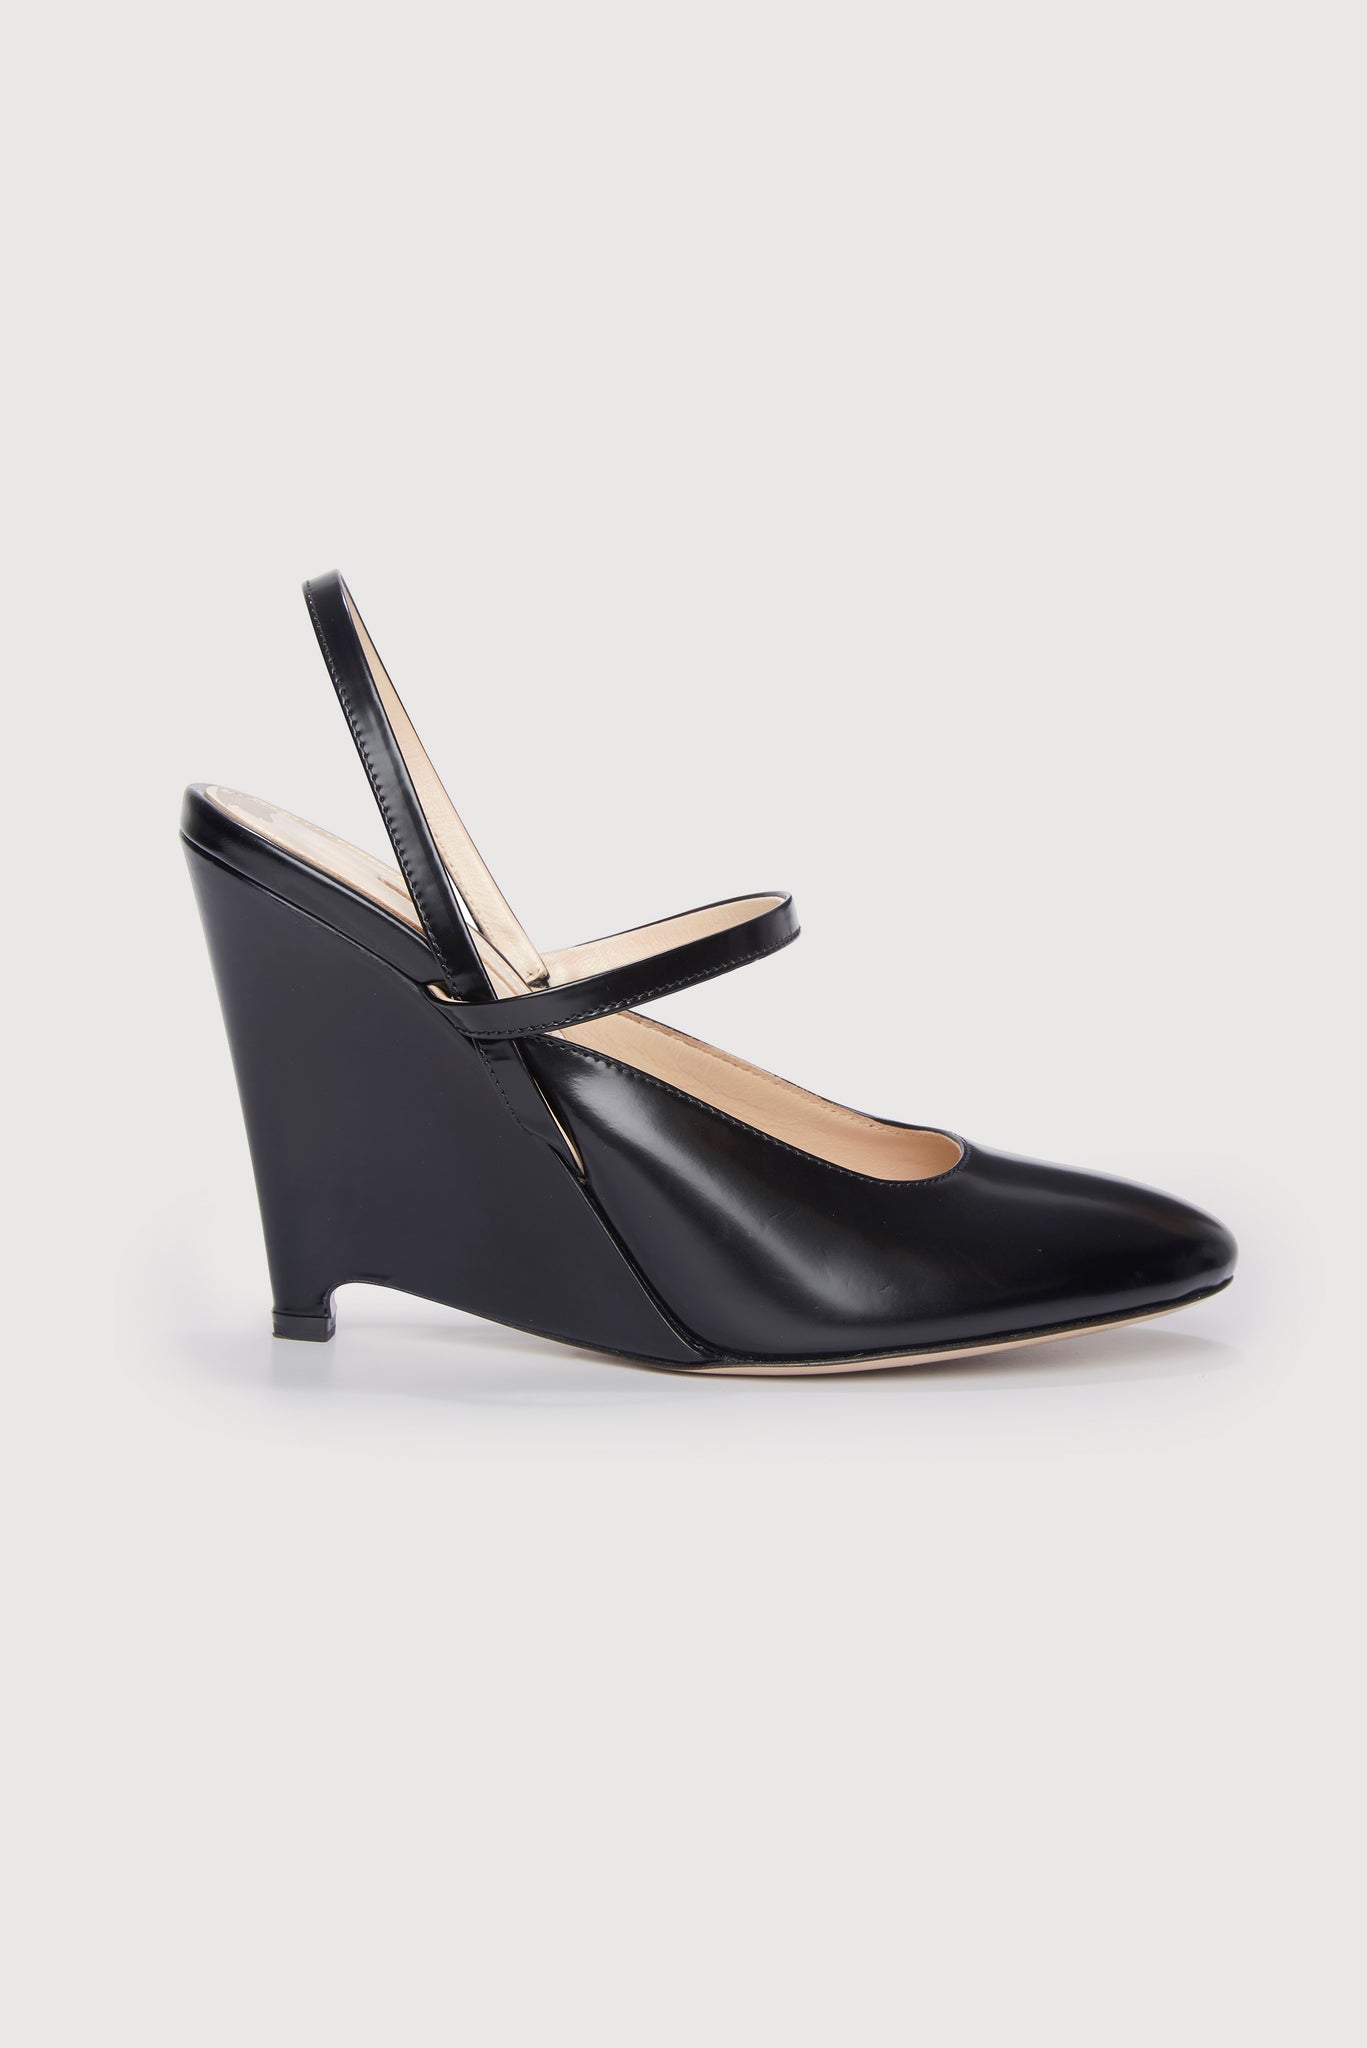 Aster Black Leather Wedge Shoes | Emilia Wickstead